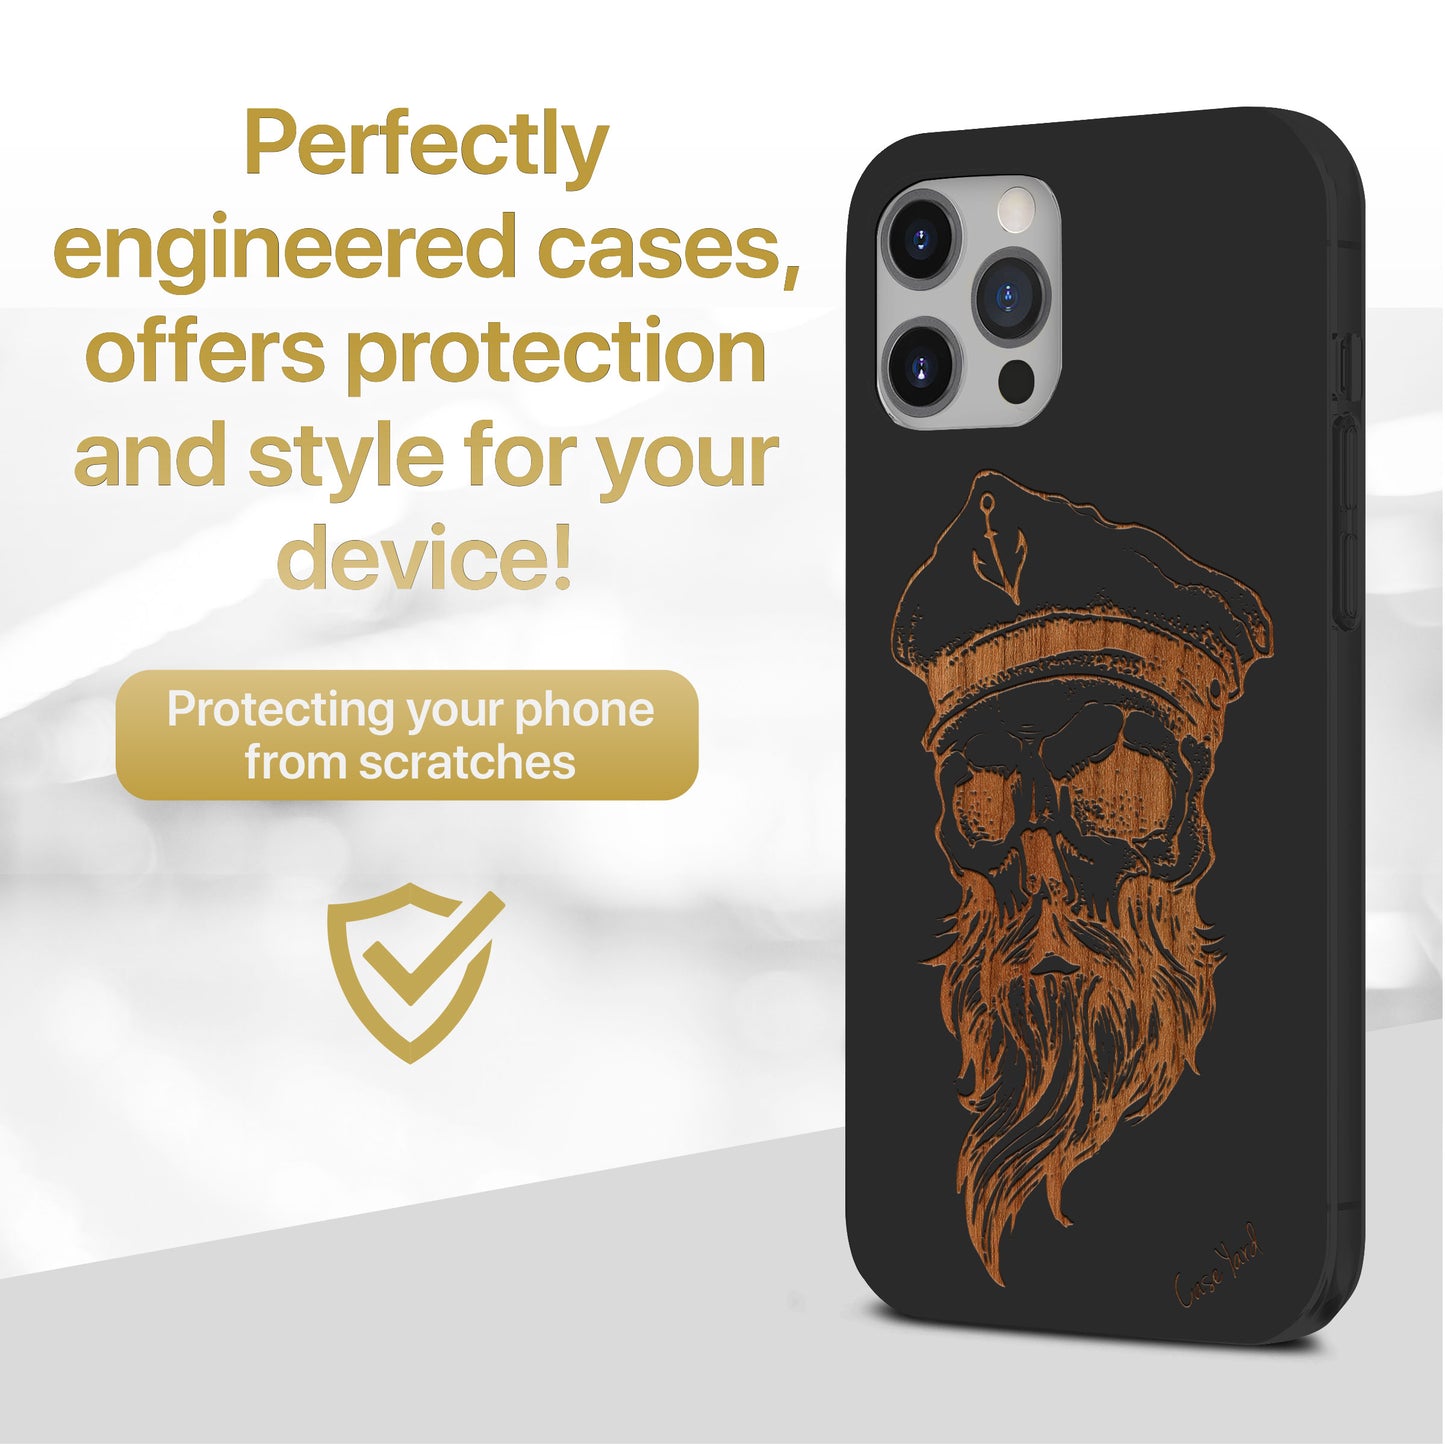 Wooden Cell Phone Case Cover, Laser Engraved case for iPhone & Samsung phone Sailor Skull Design